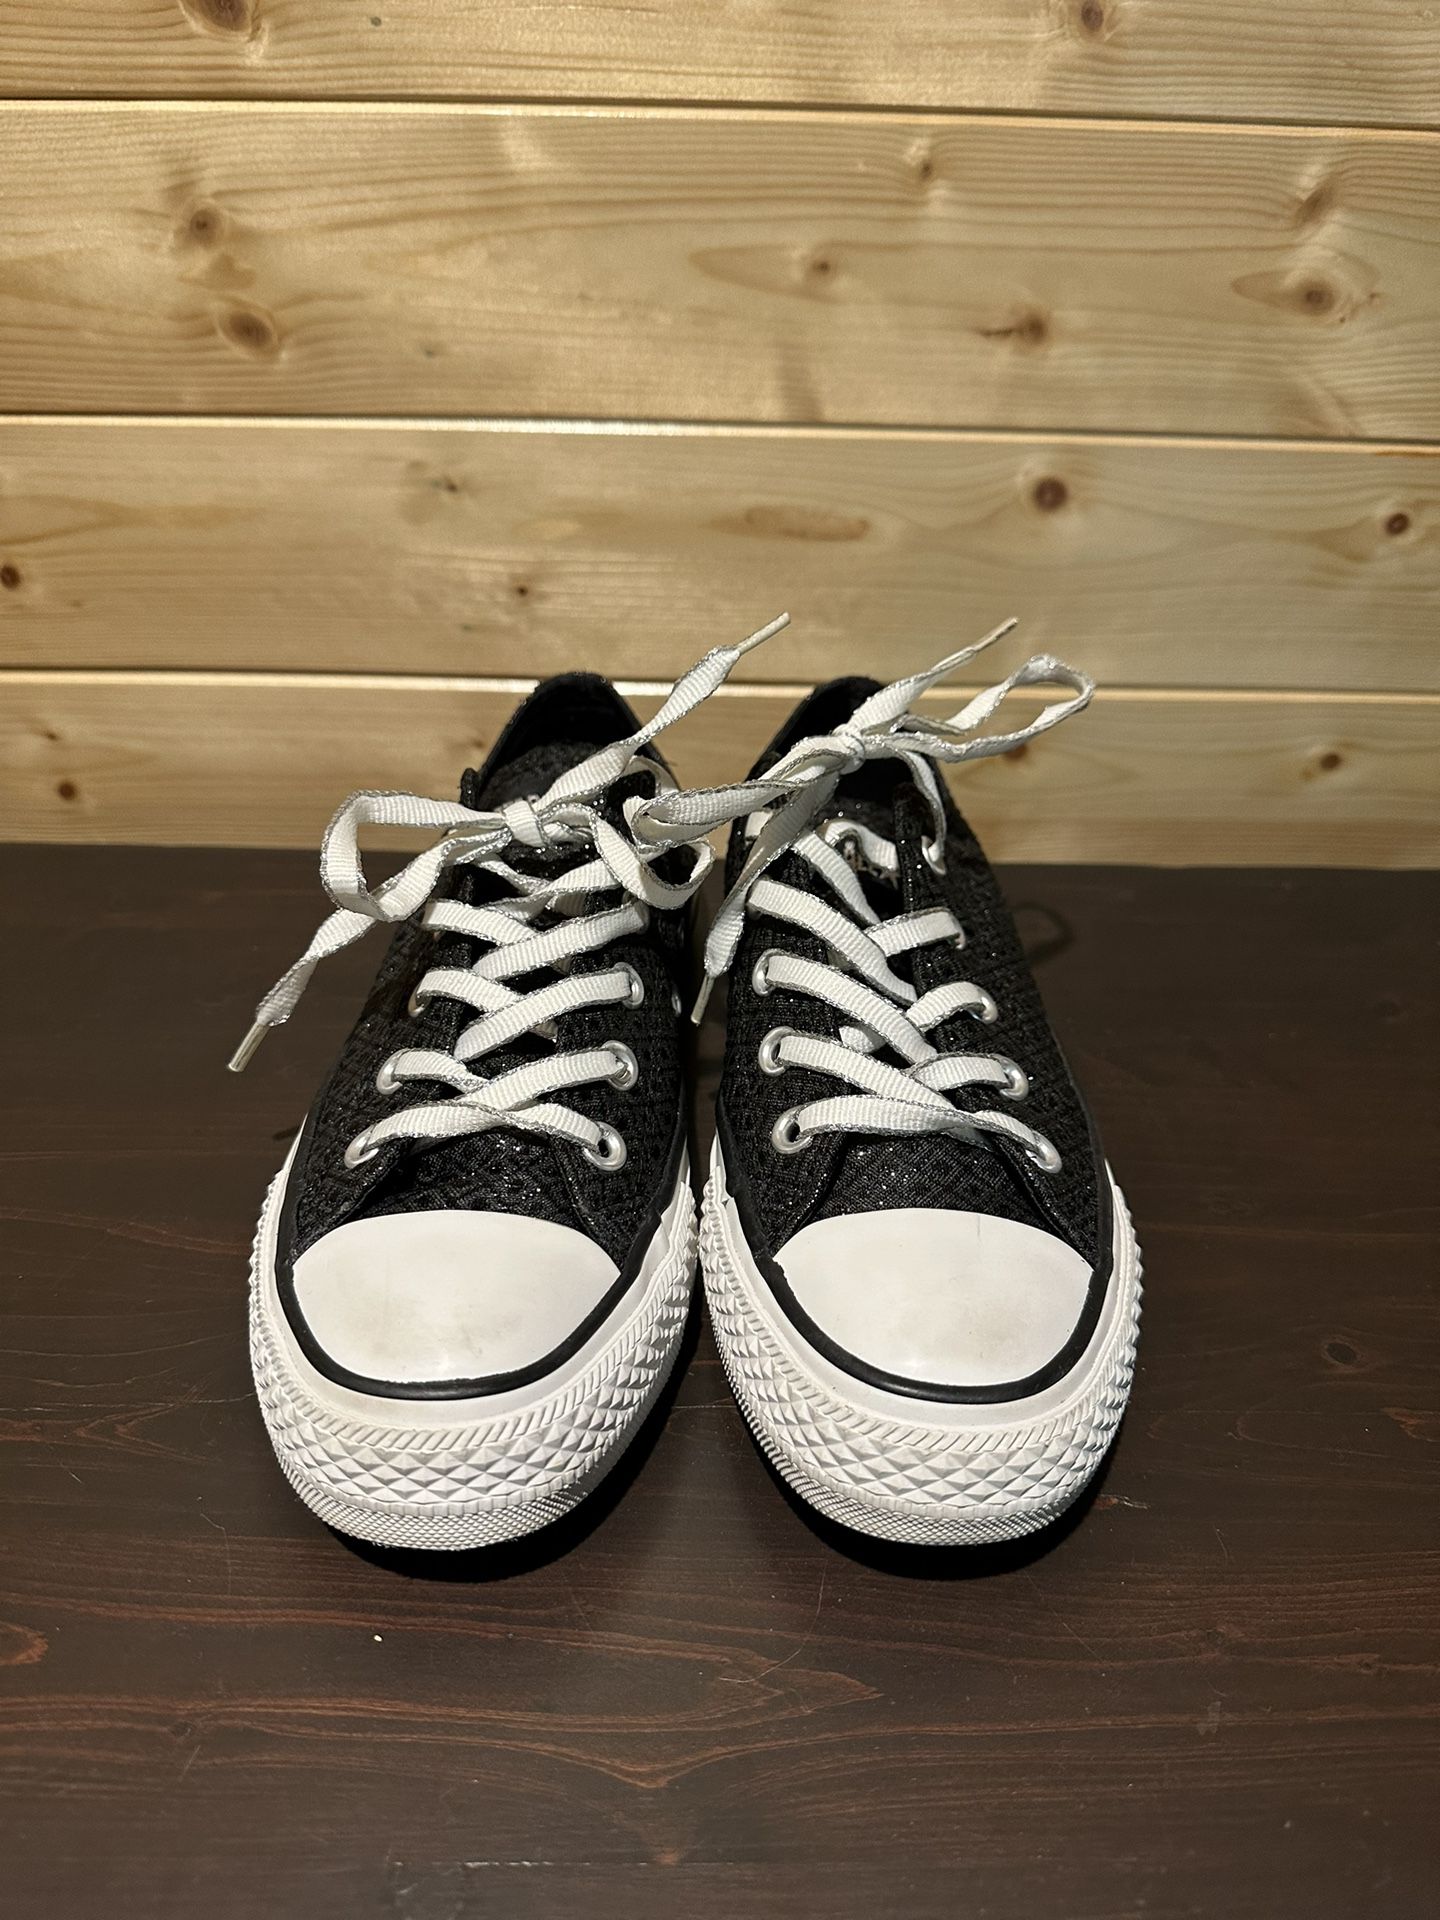 Black iridescent Converse All Star Sneakers in size 6